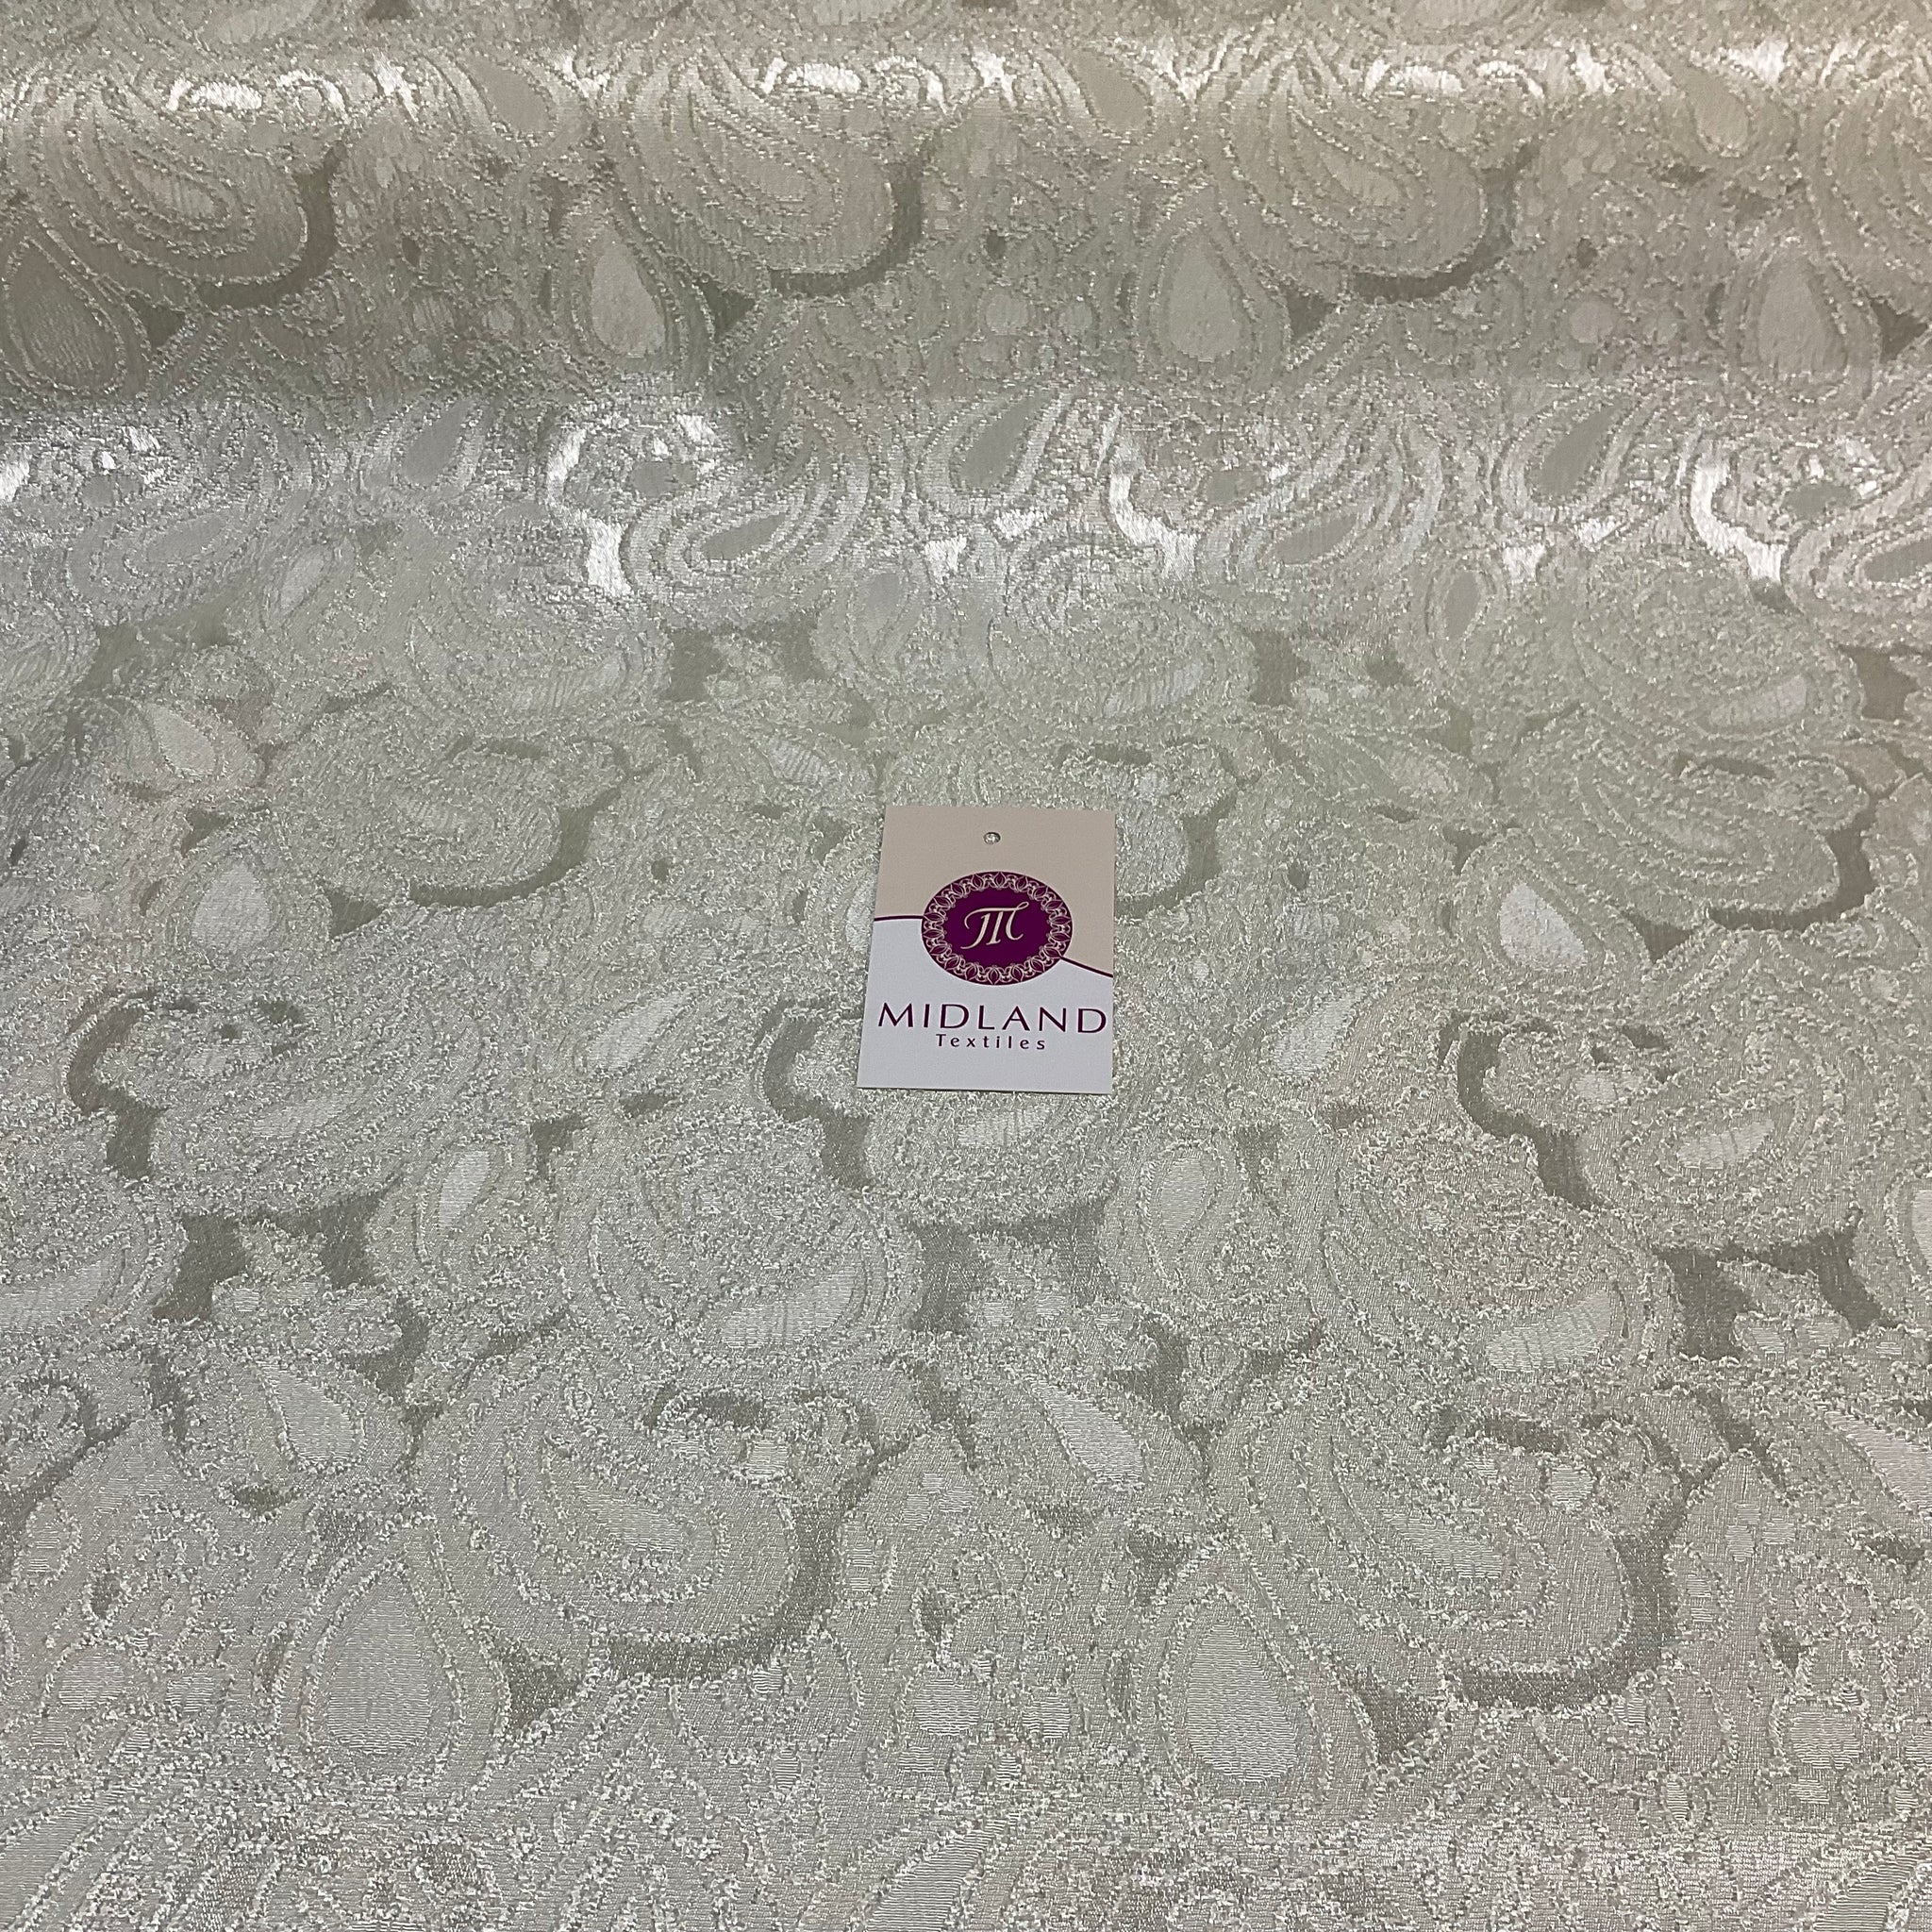 Satin Floral Jacquard Perfect for Dresses, Skirt Fabric 150cm wide M1755